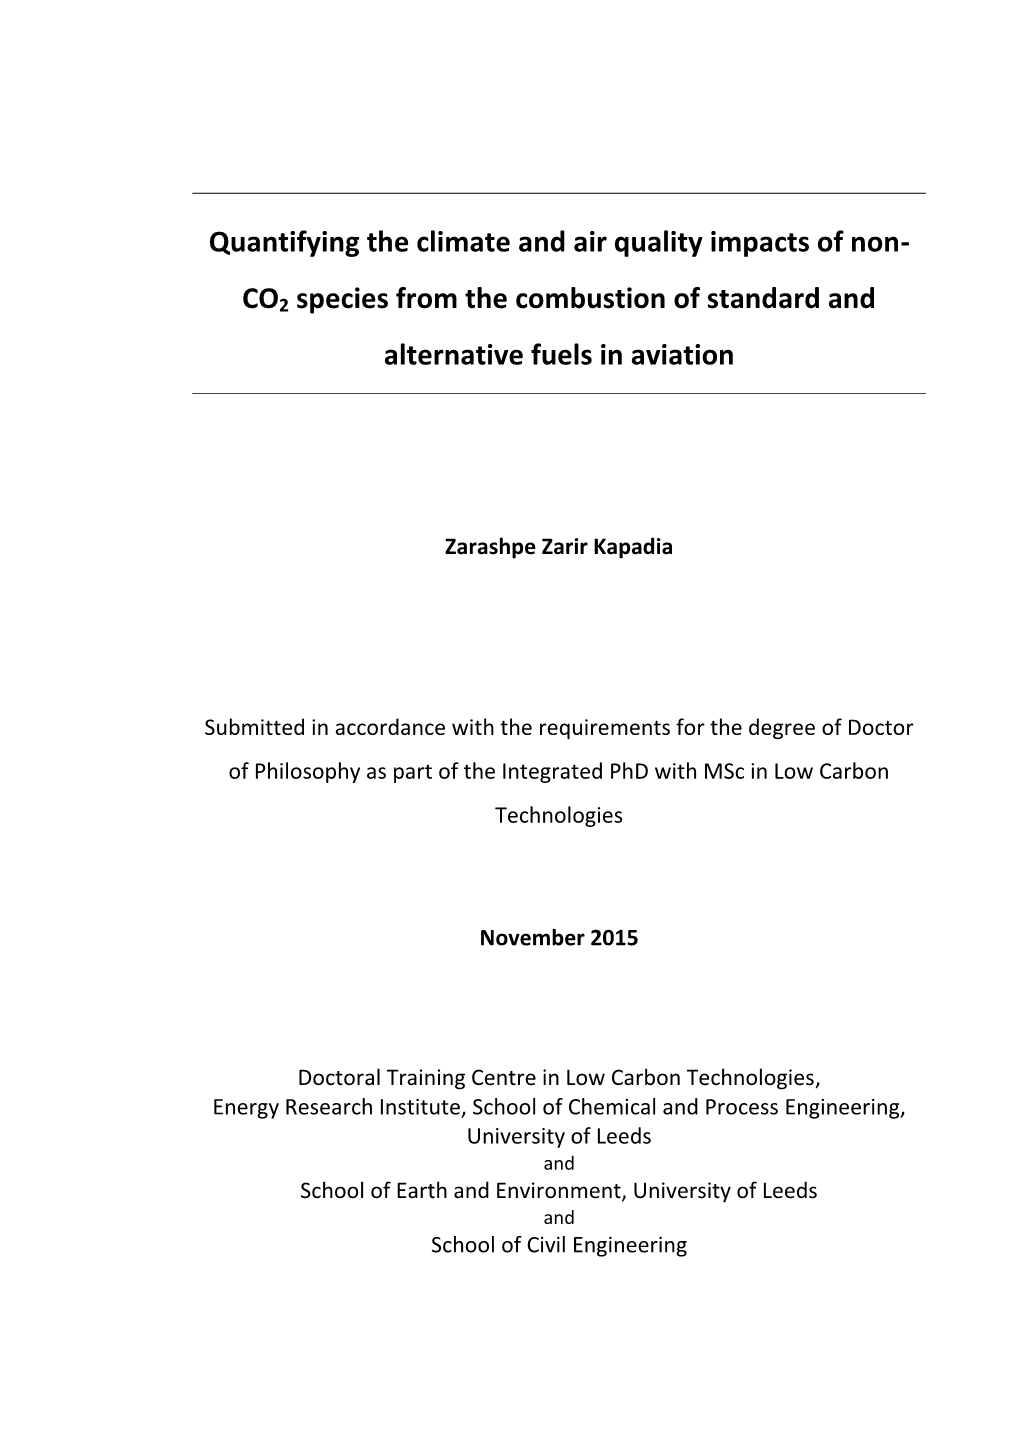 Quantifying the Climate and Air Quality Impacts of Non-CO2 Species